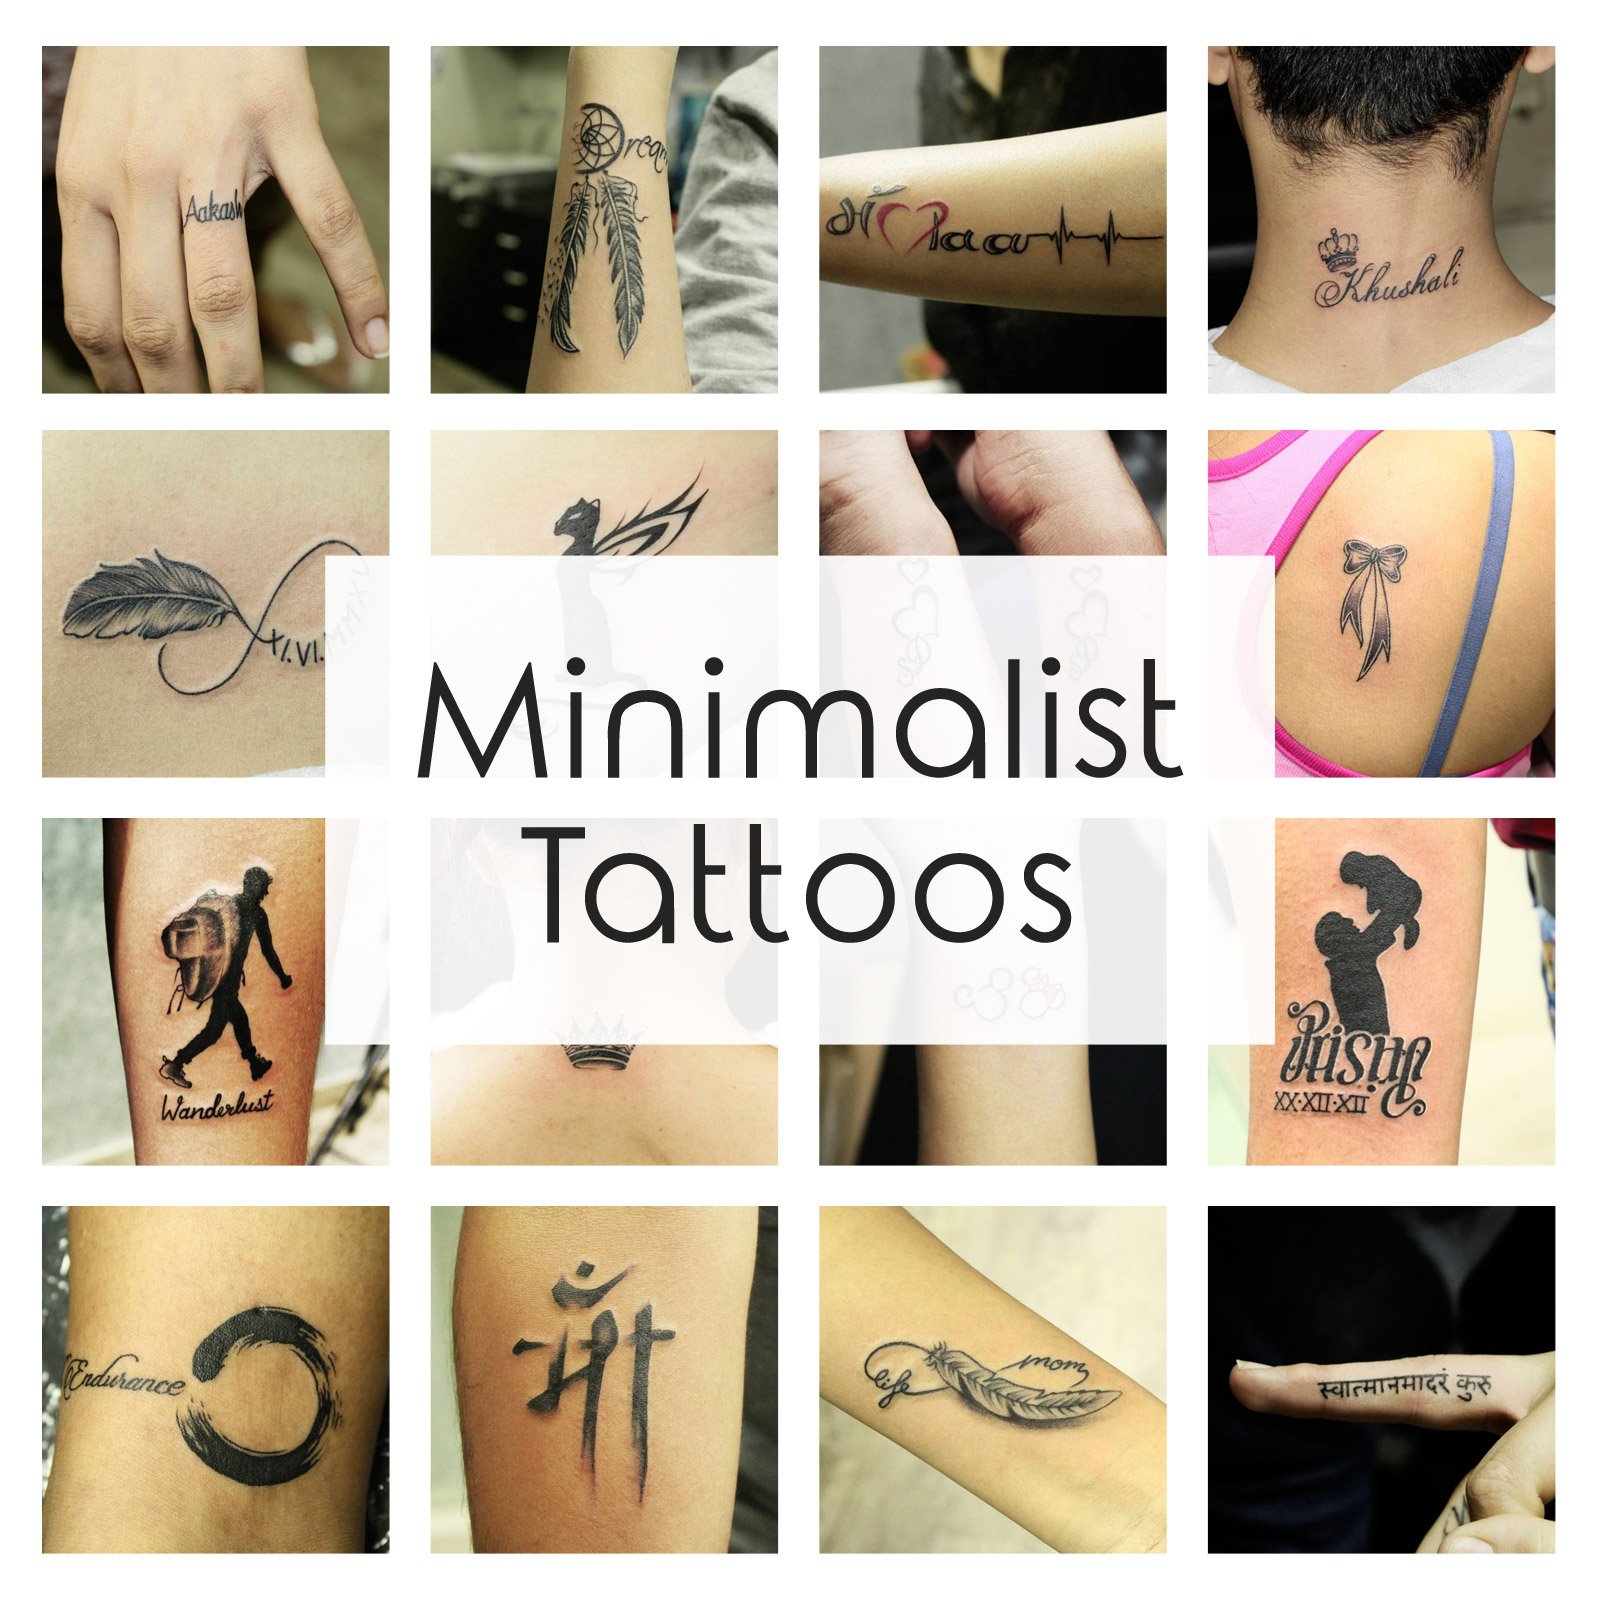 Simple Tattoos in Miami | Check Out Our simple and small Tattoo Designs for  Men & Women | Small Tattoos Miami | Fame Tattoos